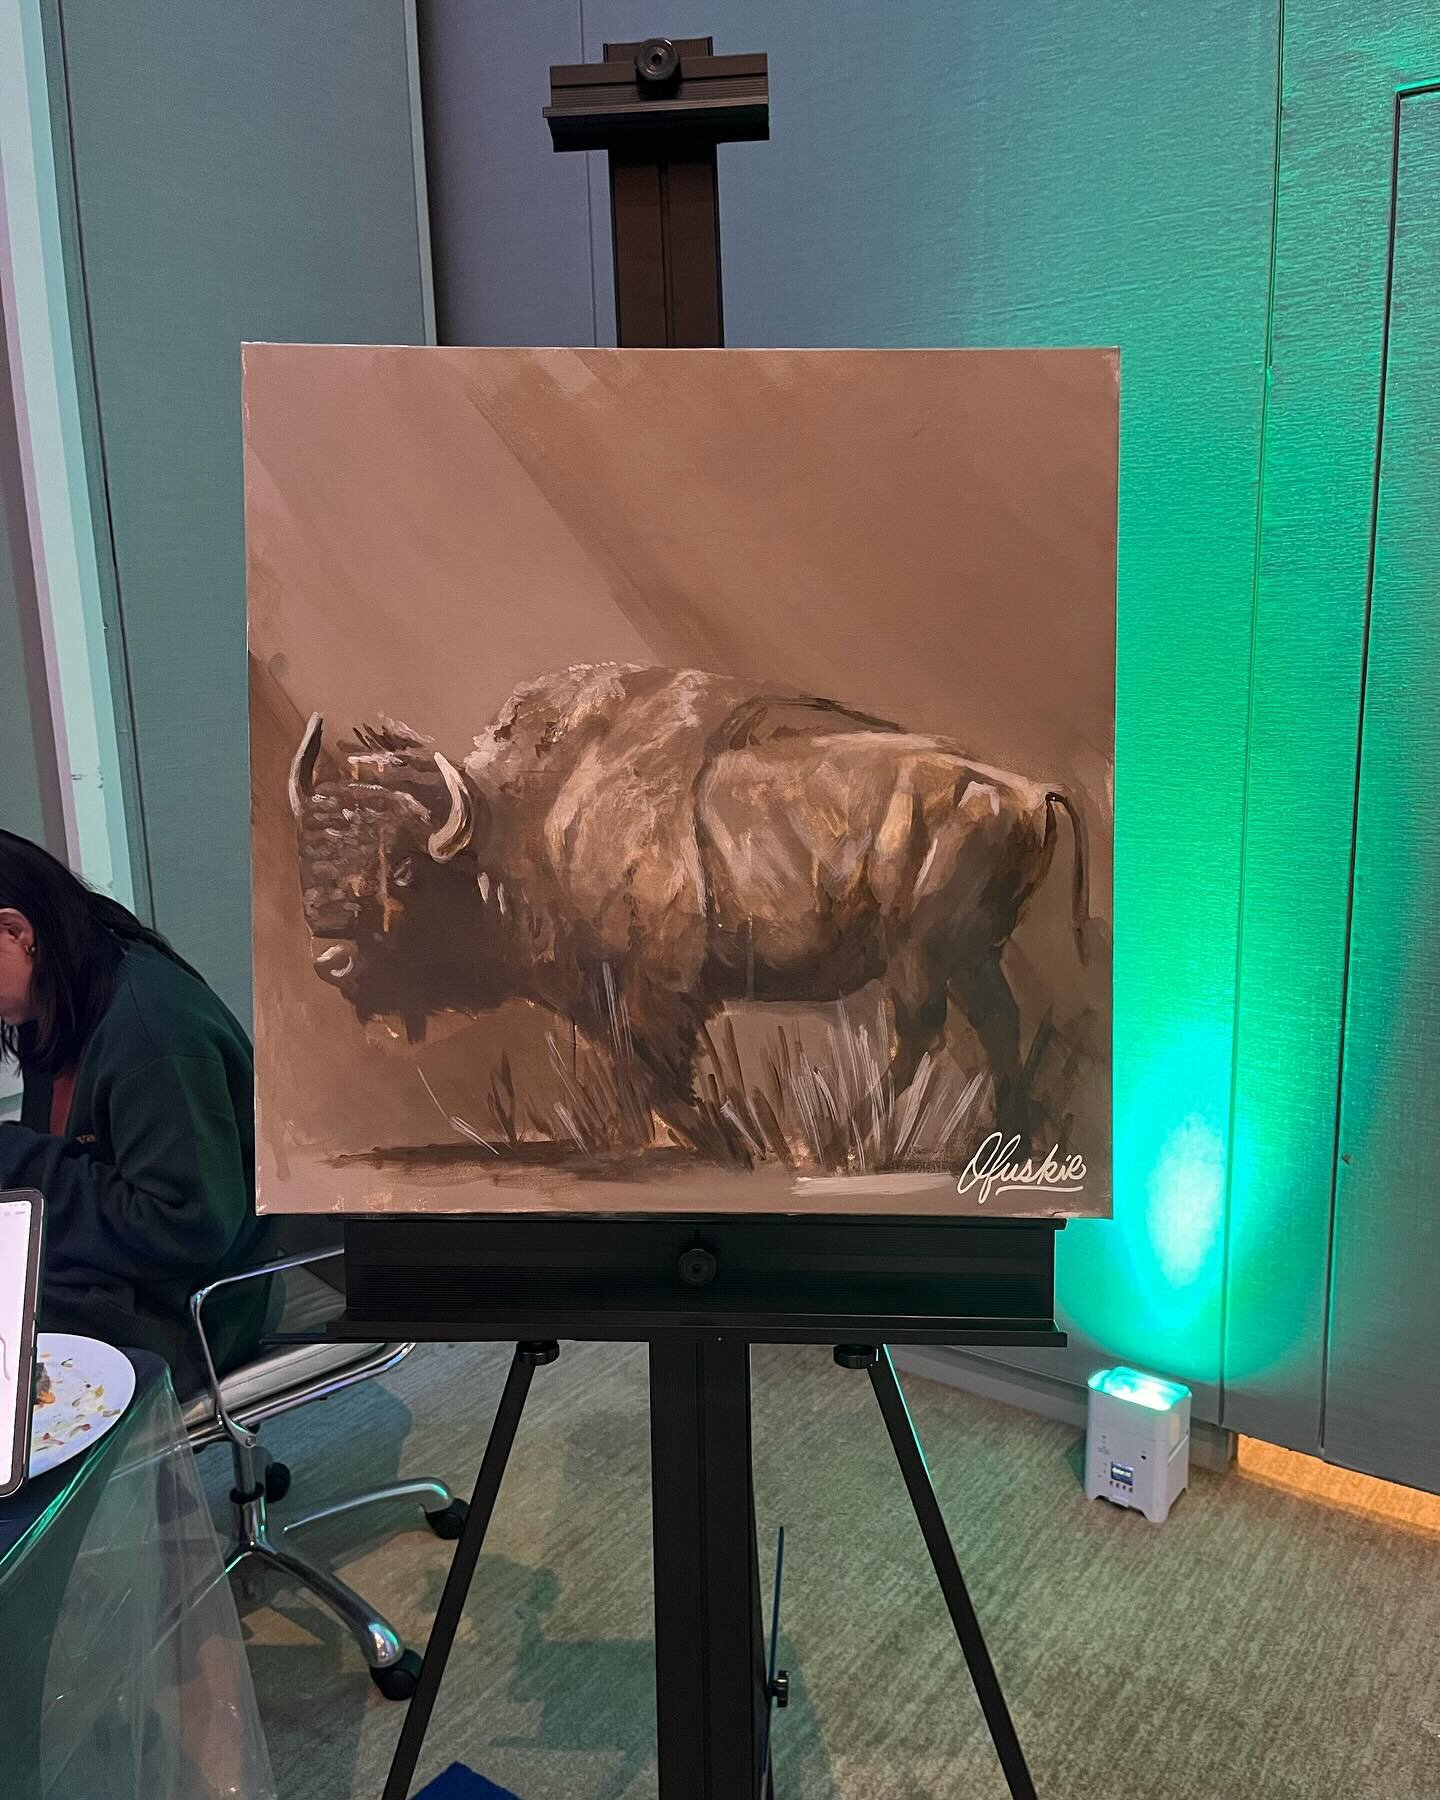 What a fantastic night at the @riverspiritcasino I was fortunate enough to do this live painting for their employee dinner. For me, it was a huge honor to do this. My family has worked there for many years, and I got my first job out of high school a